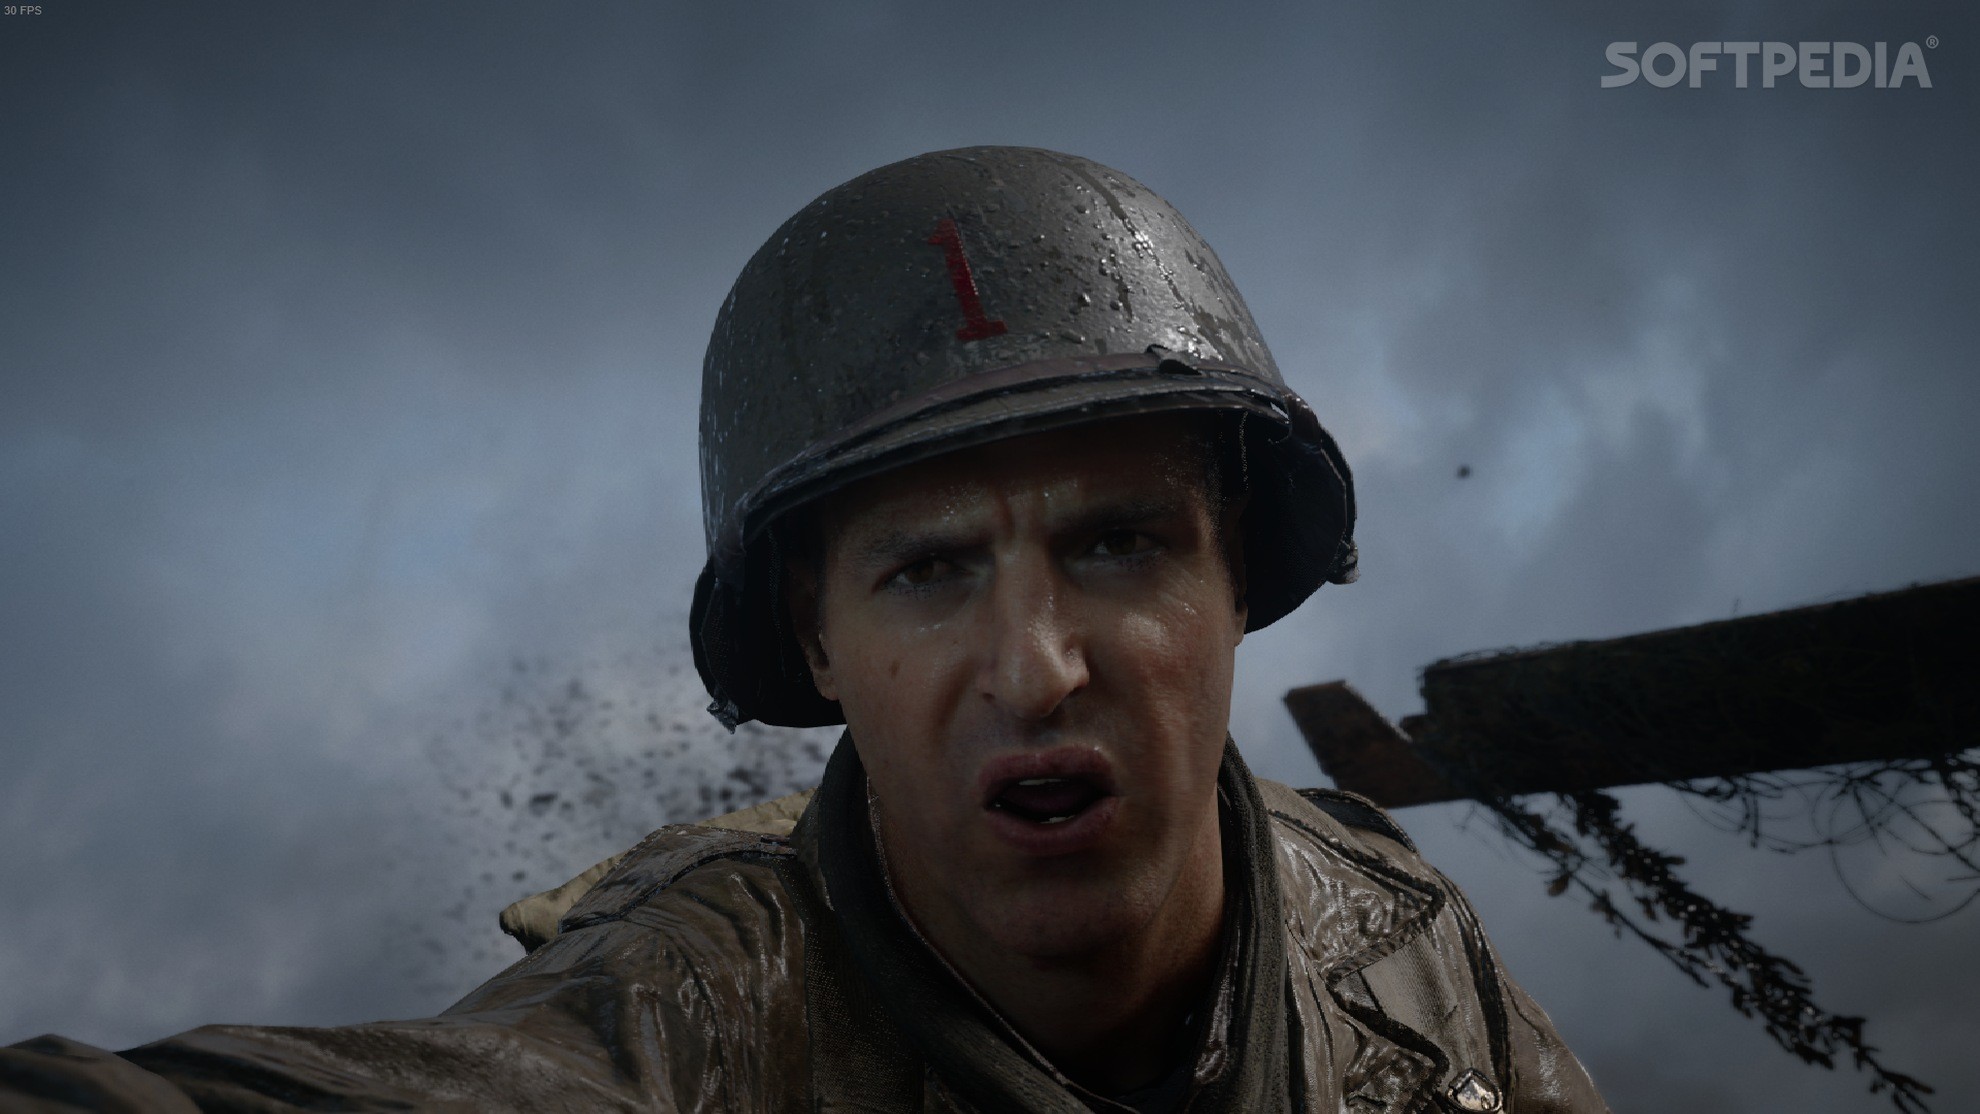 call of duty wwii download